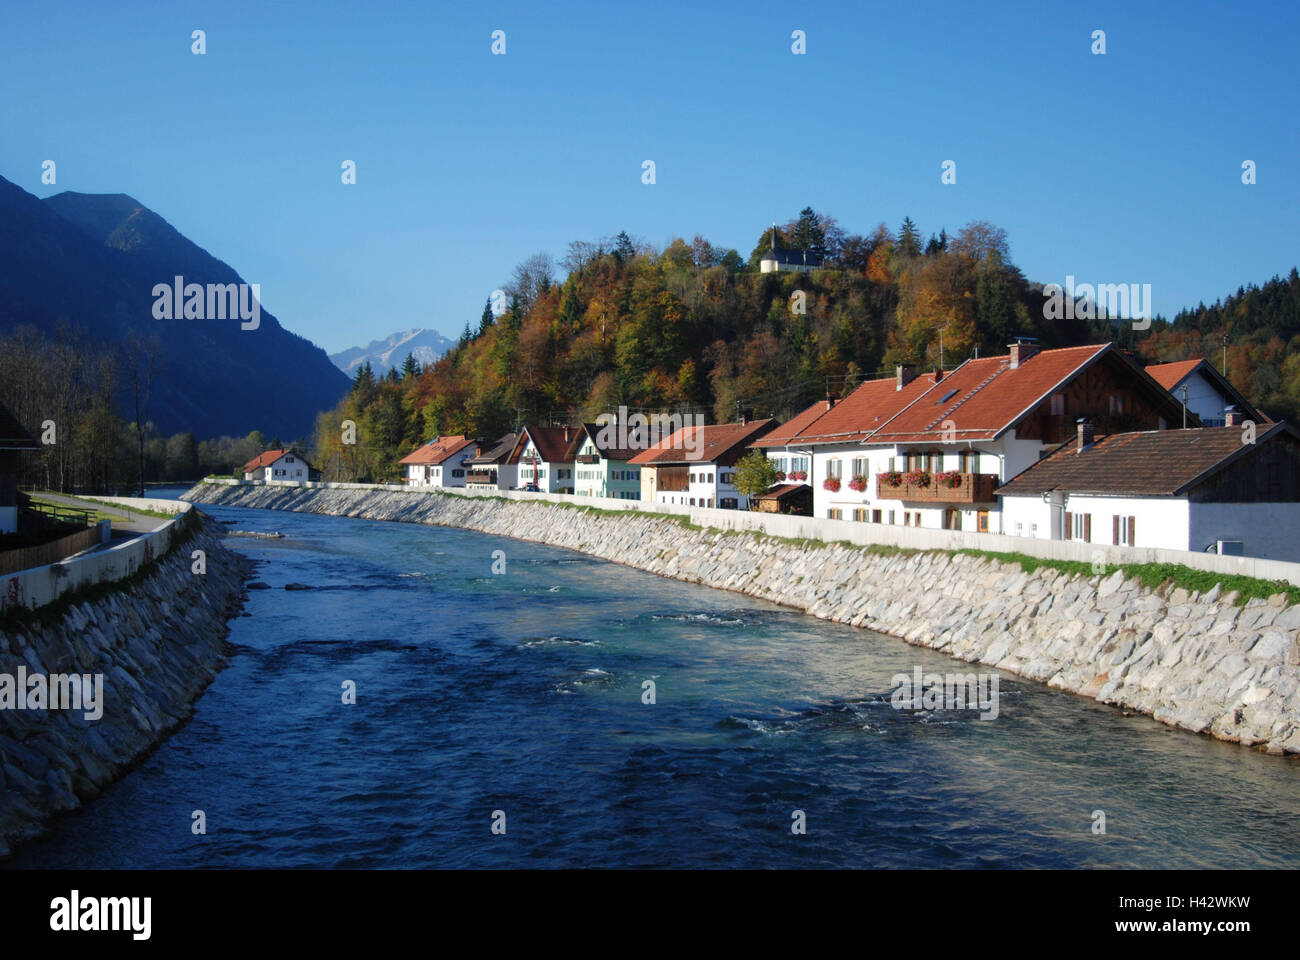 Germany, Bavaria, Eschenlohe, local view, river Loisach, autumn, Upper Bavaria, Werdenfels, Loisachtal, village, place, rurally, Loisach, waters, course of a river, Uferverbauung, flood control, mountains, hills, band, chapel, St. Santa's band, nobody, autumnally, season, Stock Photo